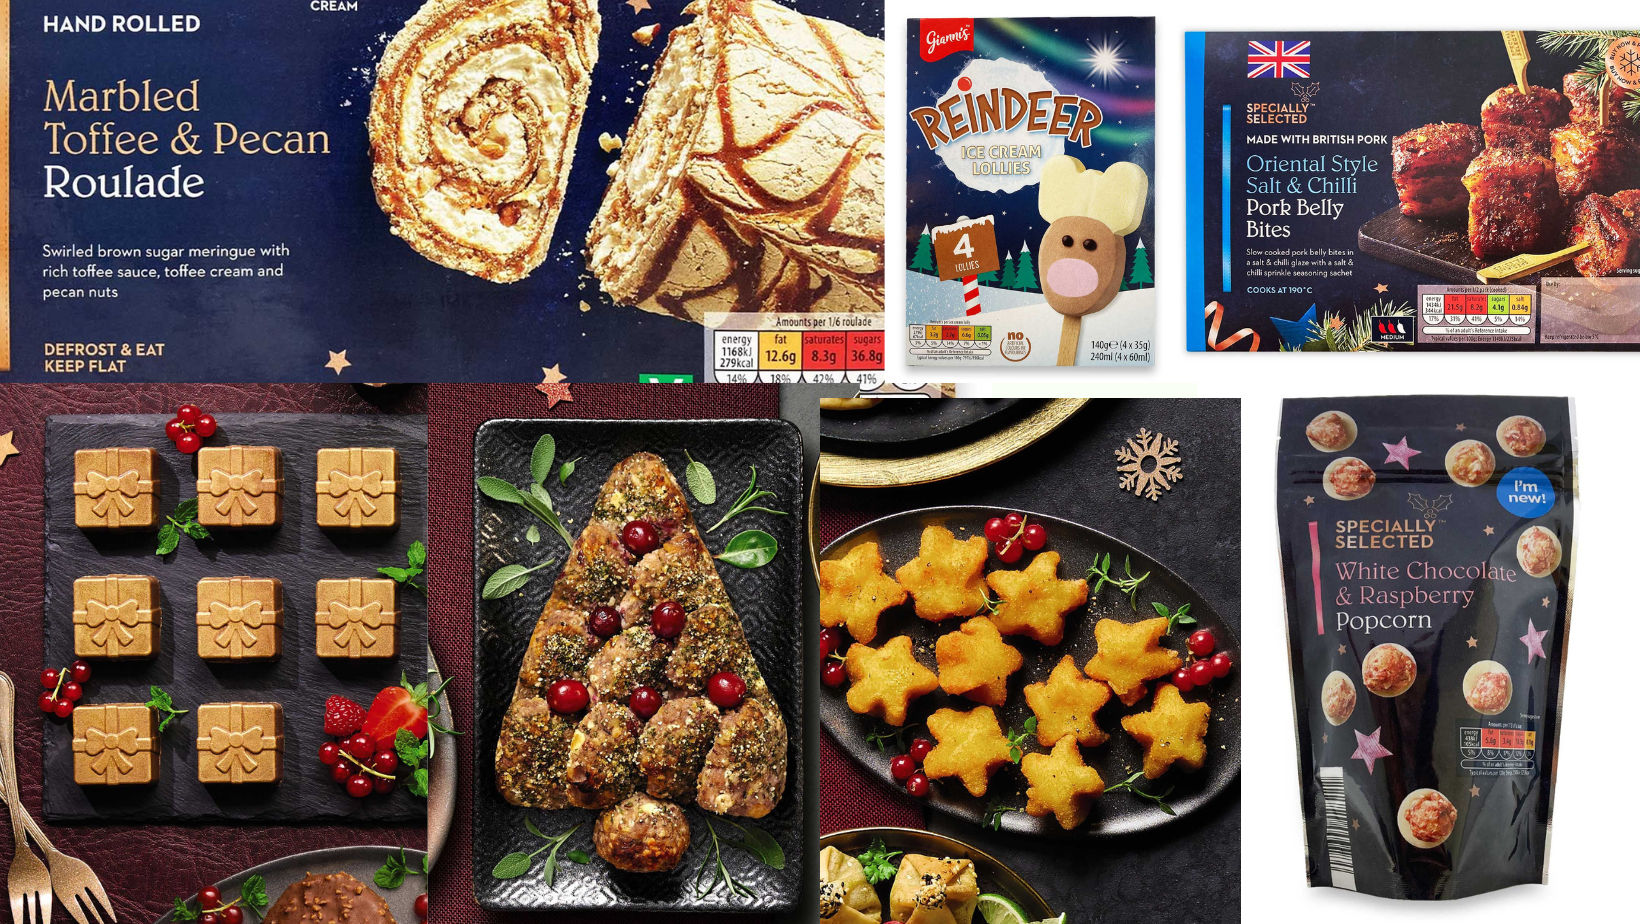 https://www.mygfguide.com/wp-content/uploads/2021/12/Aldi-Party-Food-2021.png